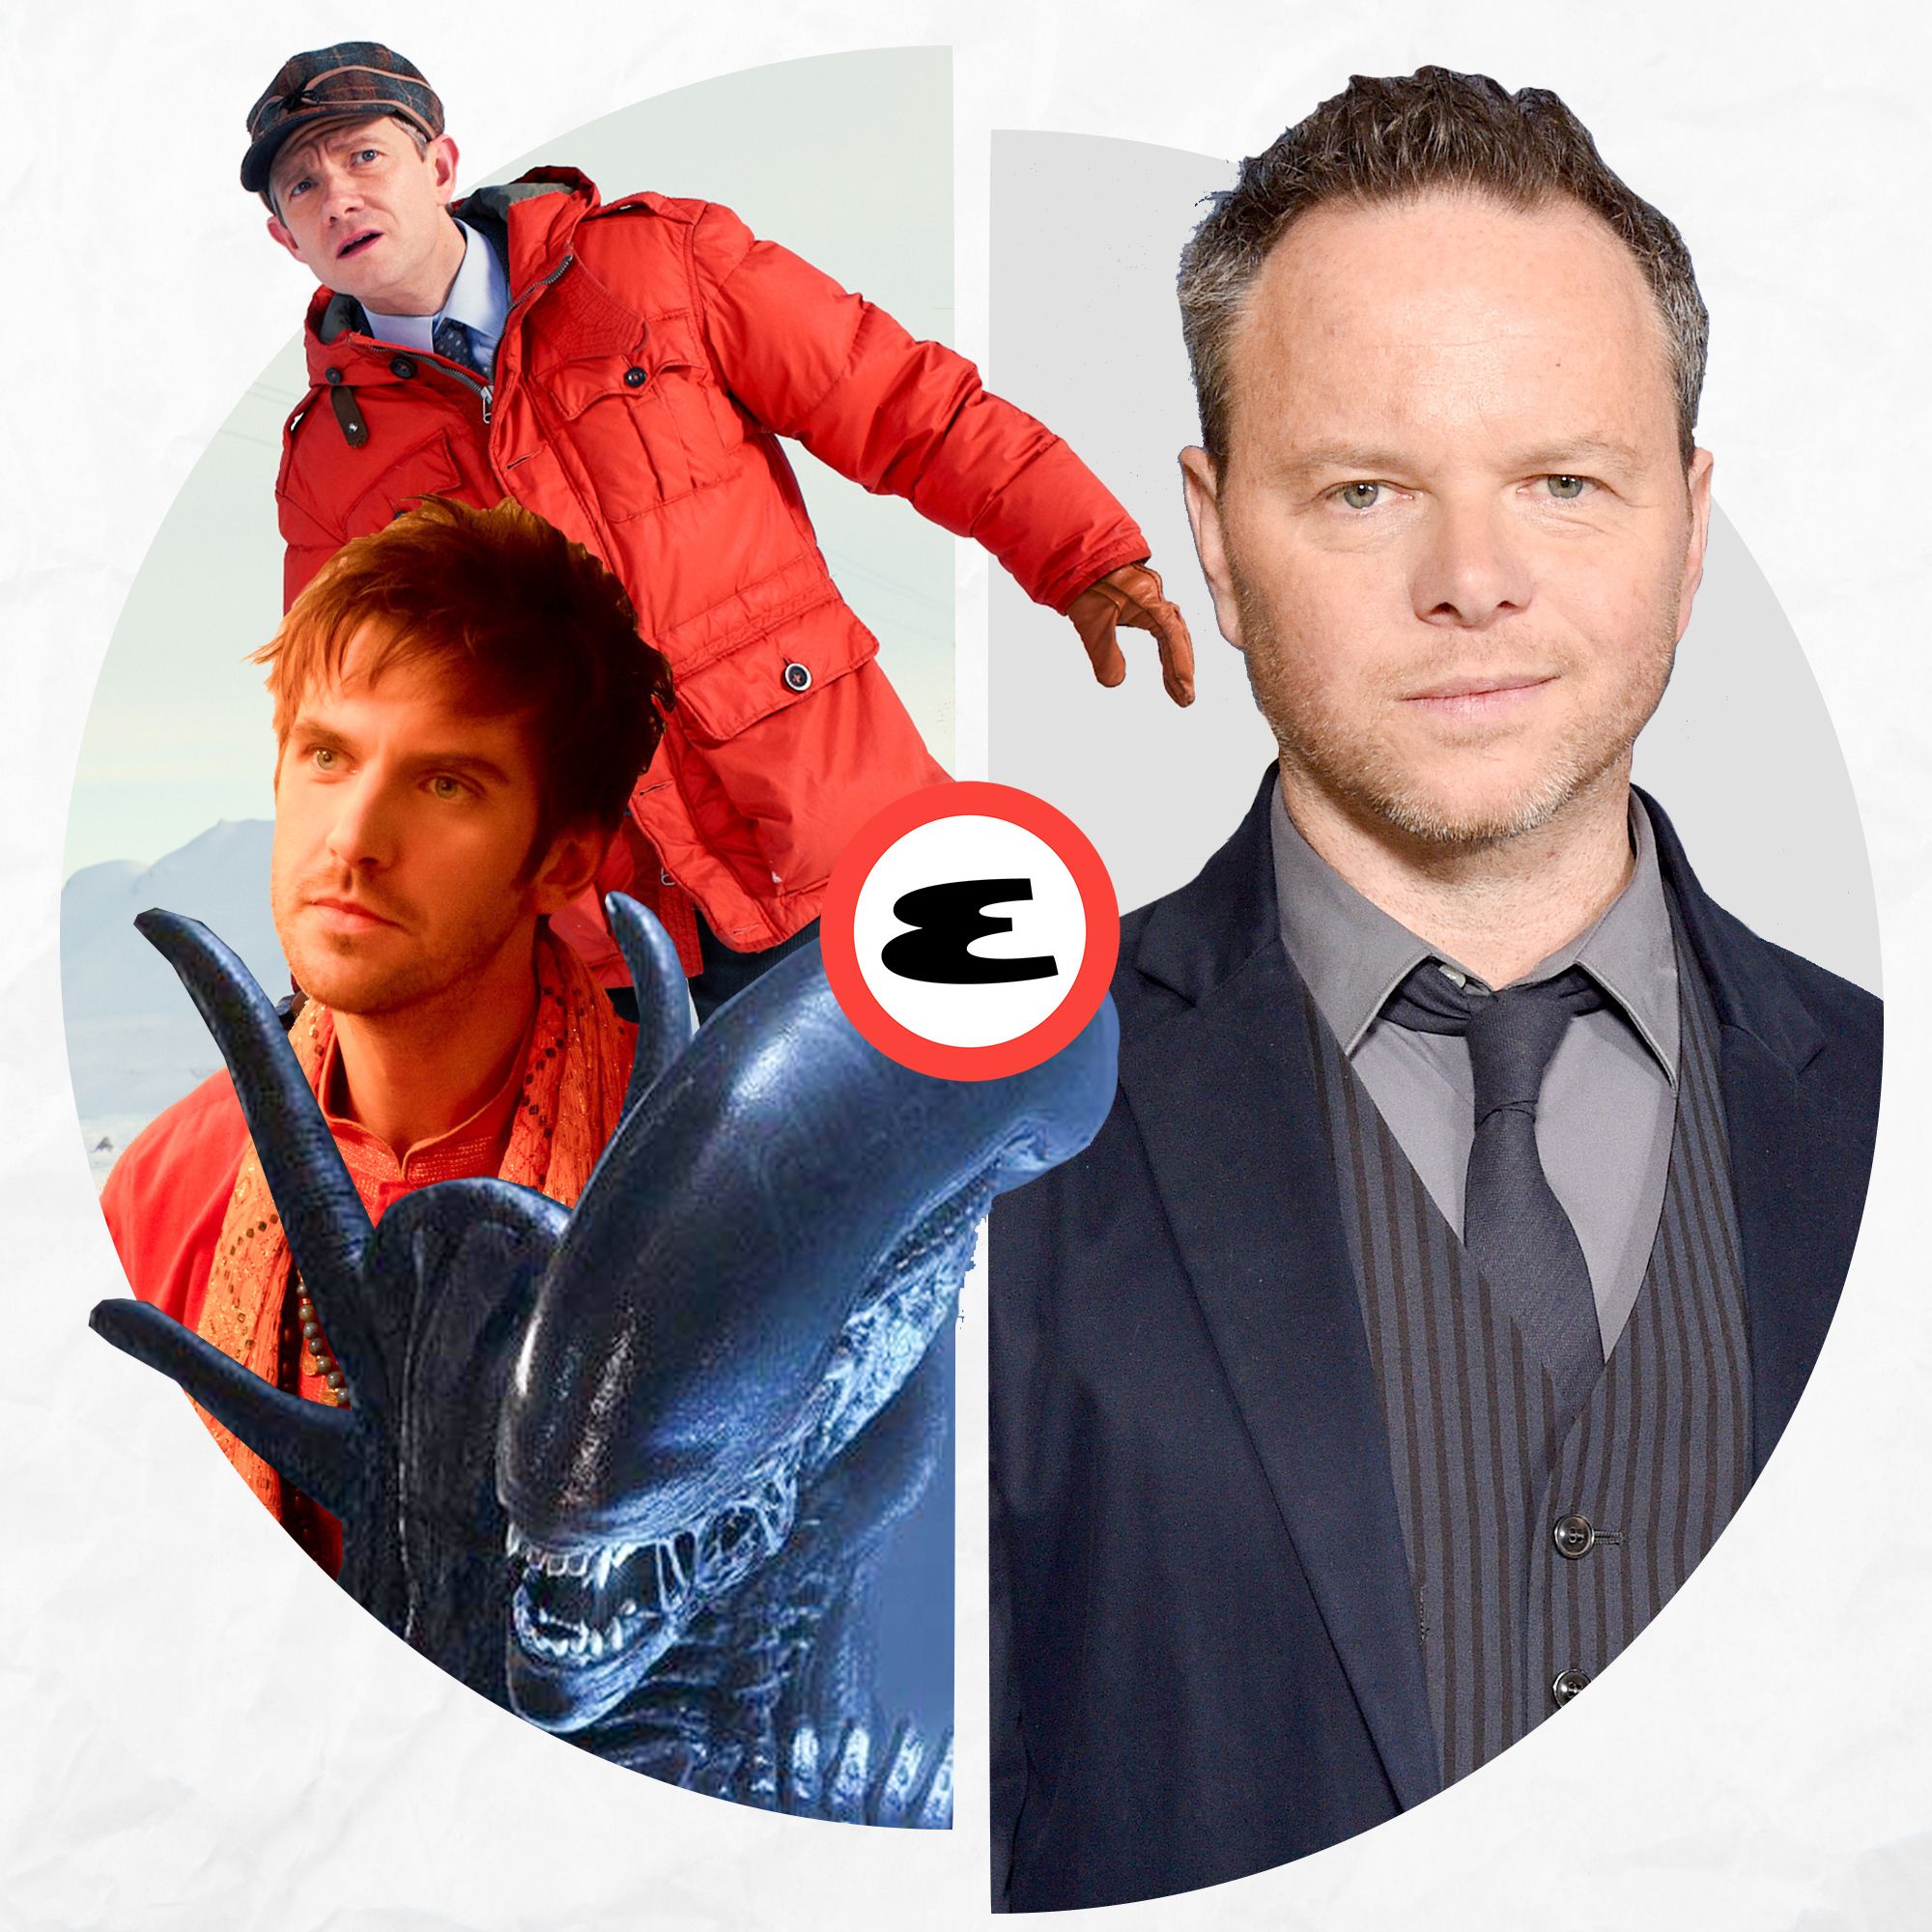 Join Our Live Conference Call with Noah Hawley on Thursday, January 6!